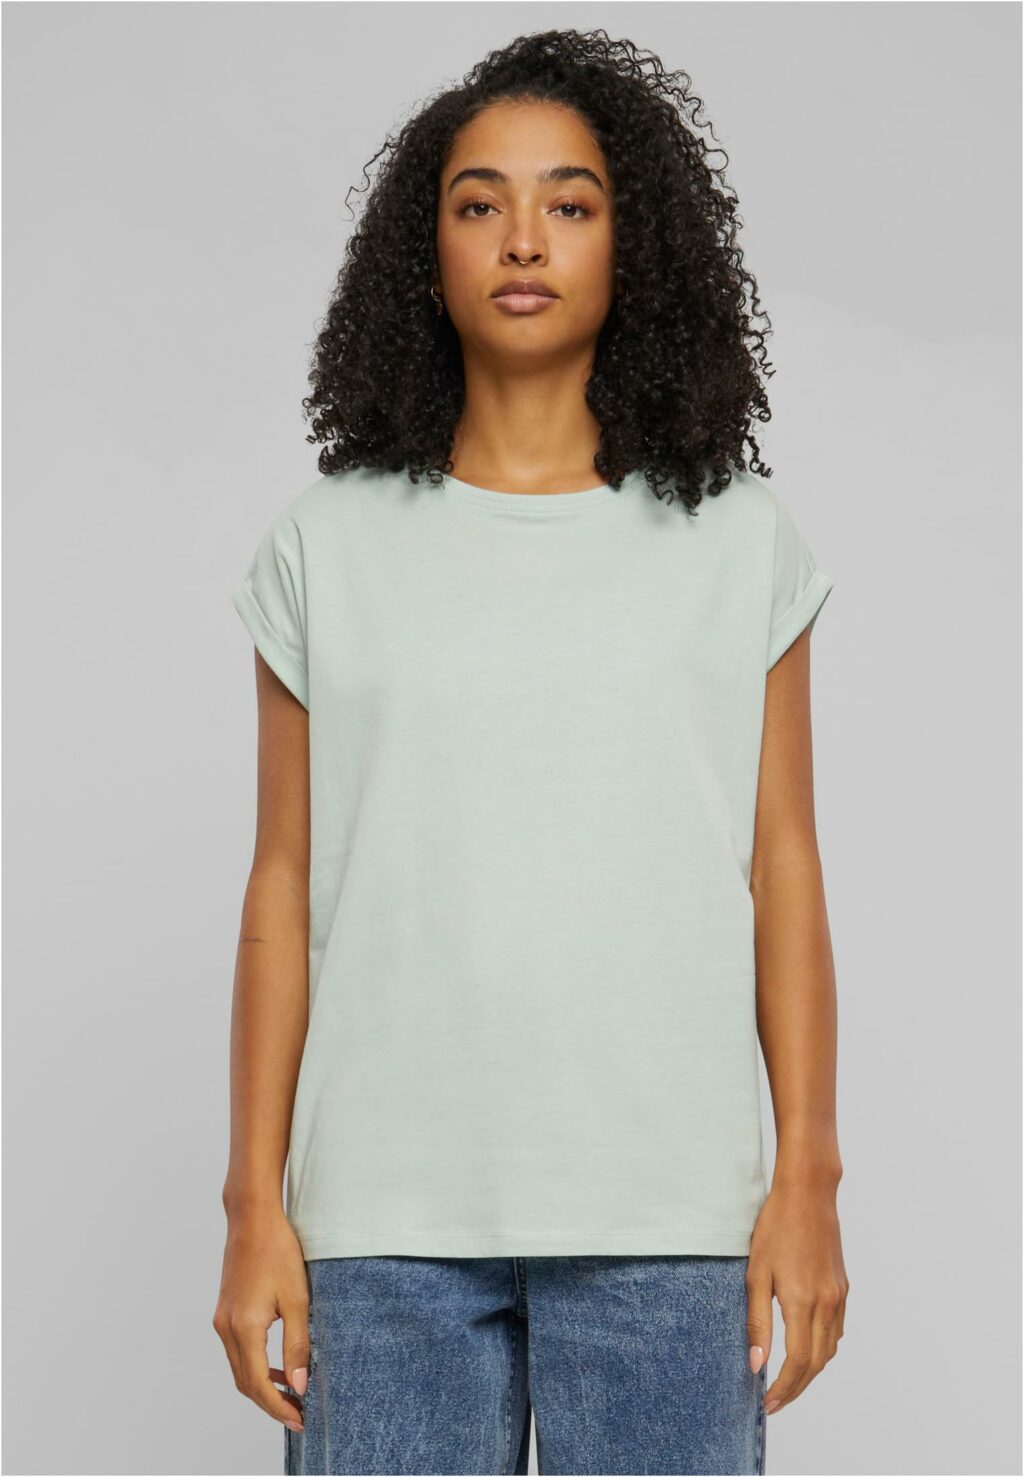 Urban Classics Ladies Extended Shoulder Tee frostmint TB771